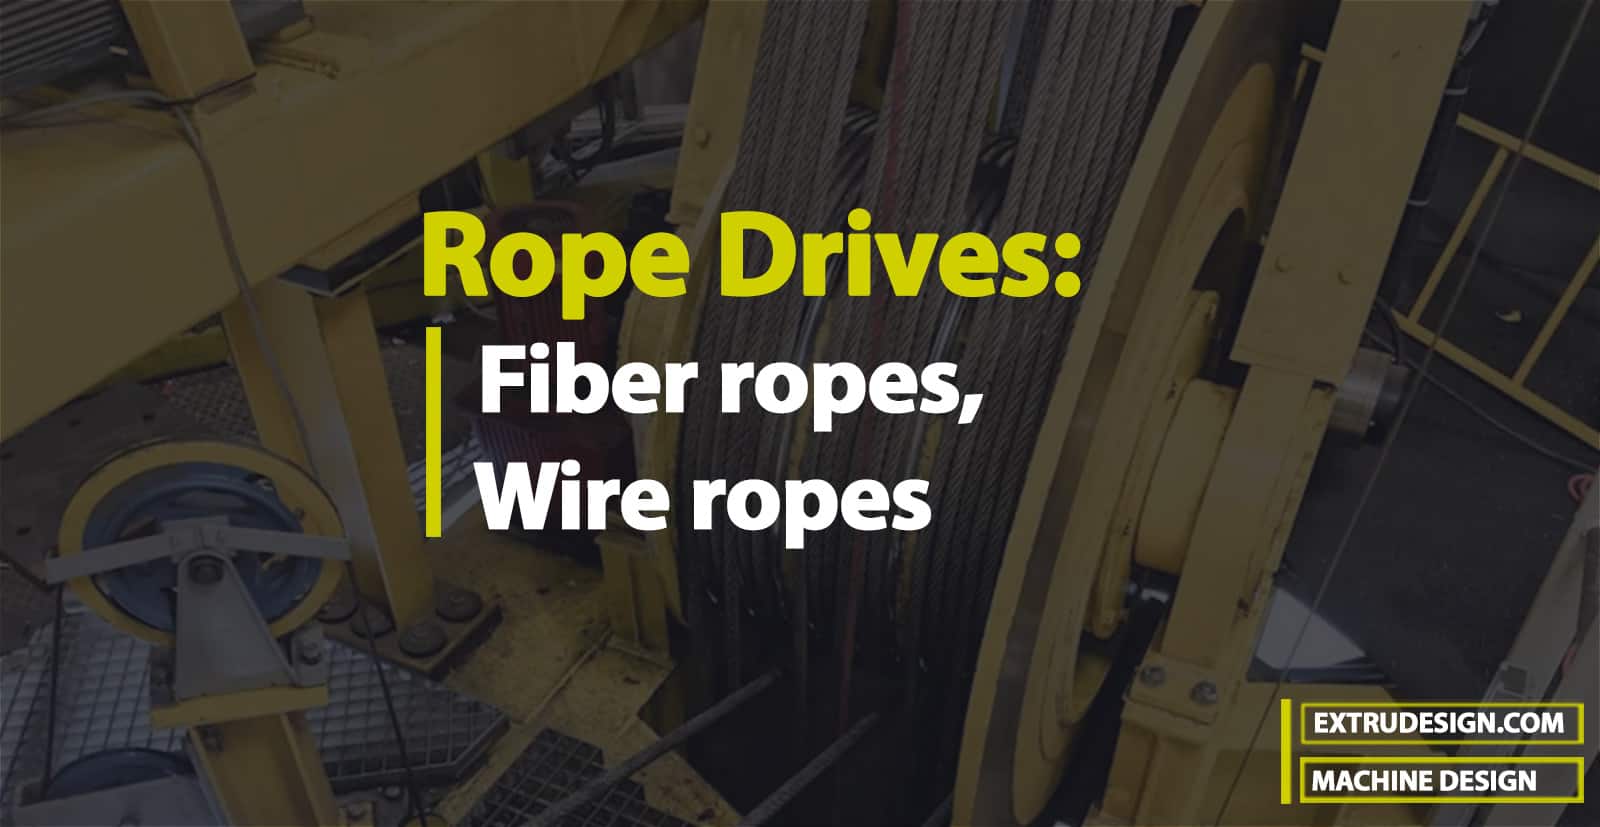 Rope Drives: Fiber ropes, Wire ropes